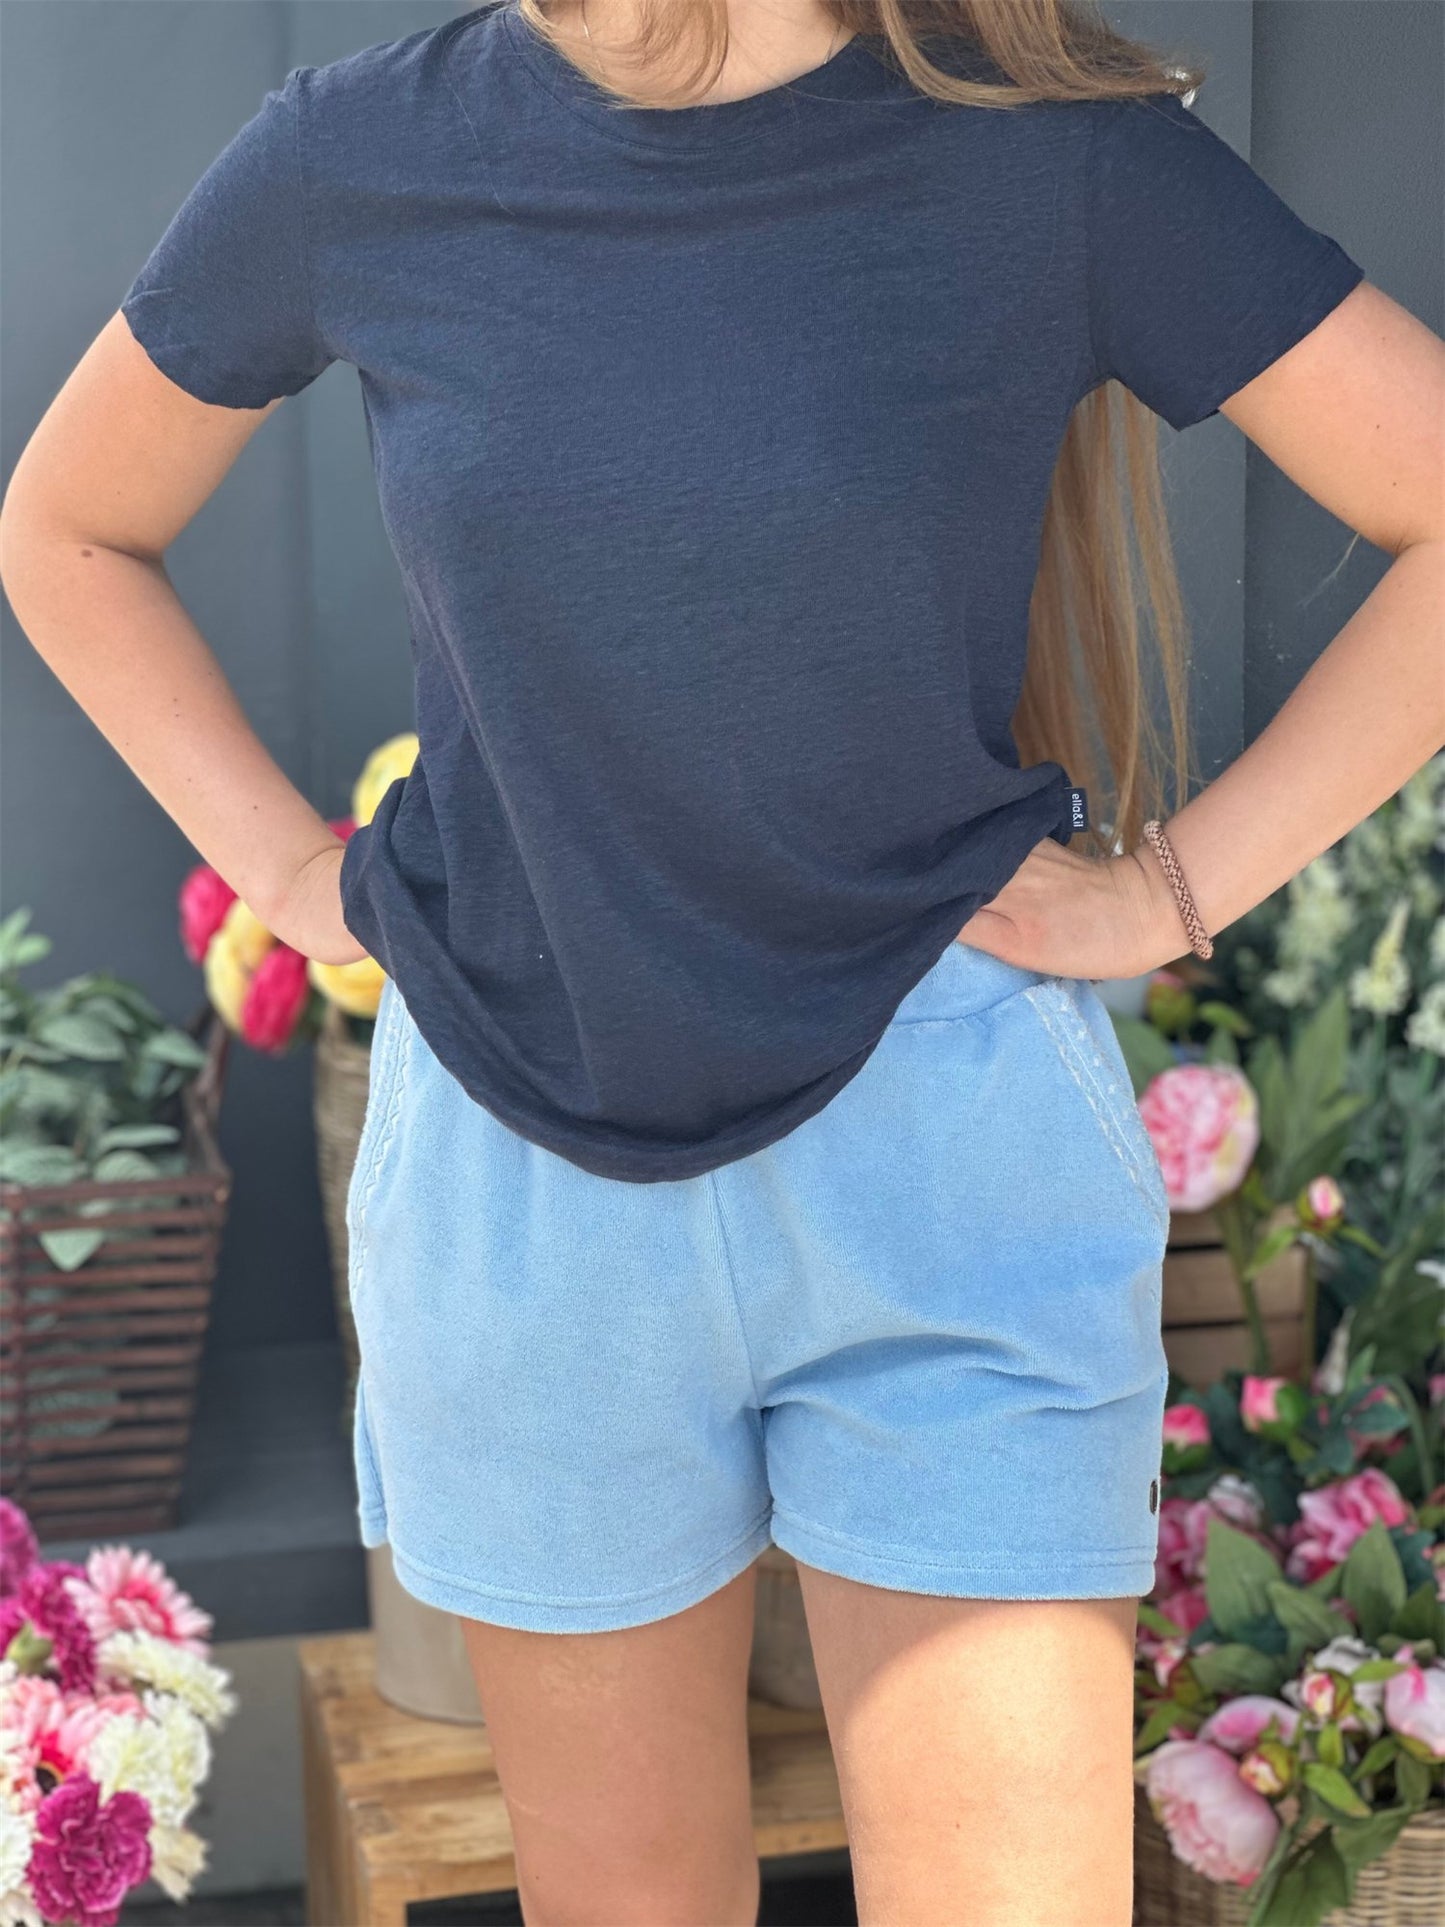 Katelin Shorts W/ Embroidery - Light Blue - at home